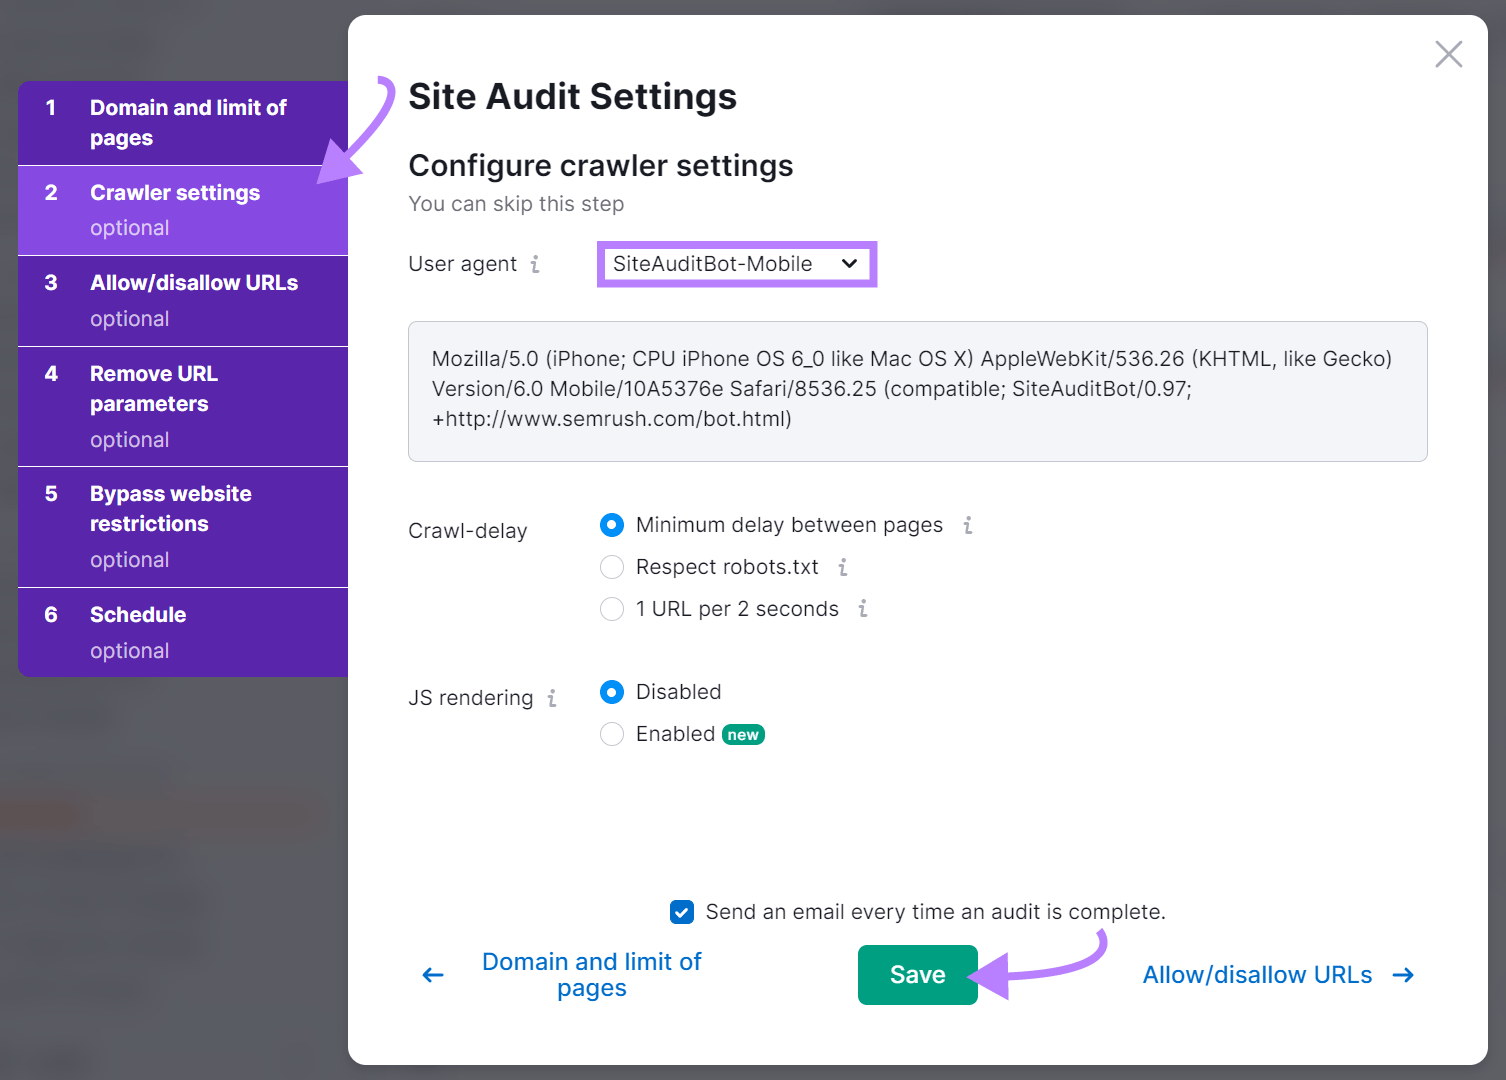 Site Audit settings leafage   showing crawler acceptable   to "SiteAuditBot-Mobile"